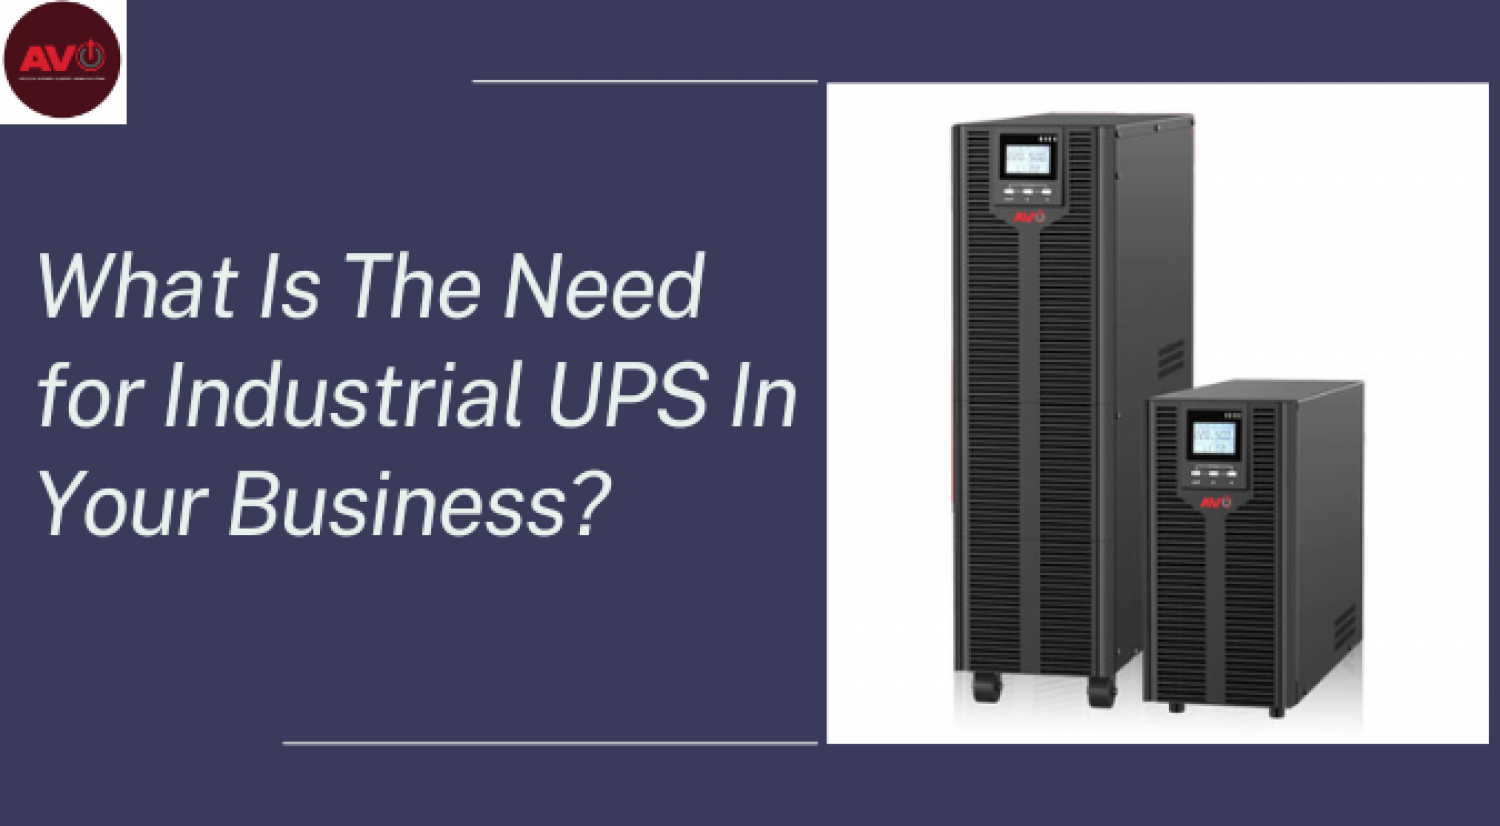 What Is The Need for Industrial UPS In Your Business? Infographic